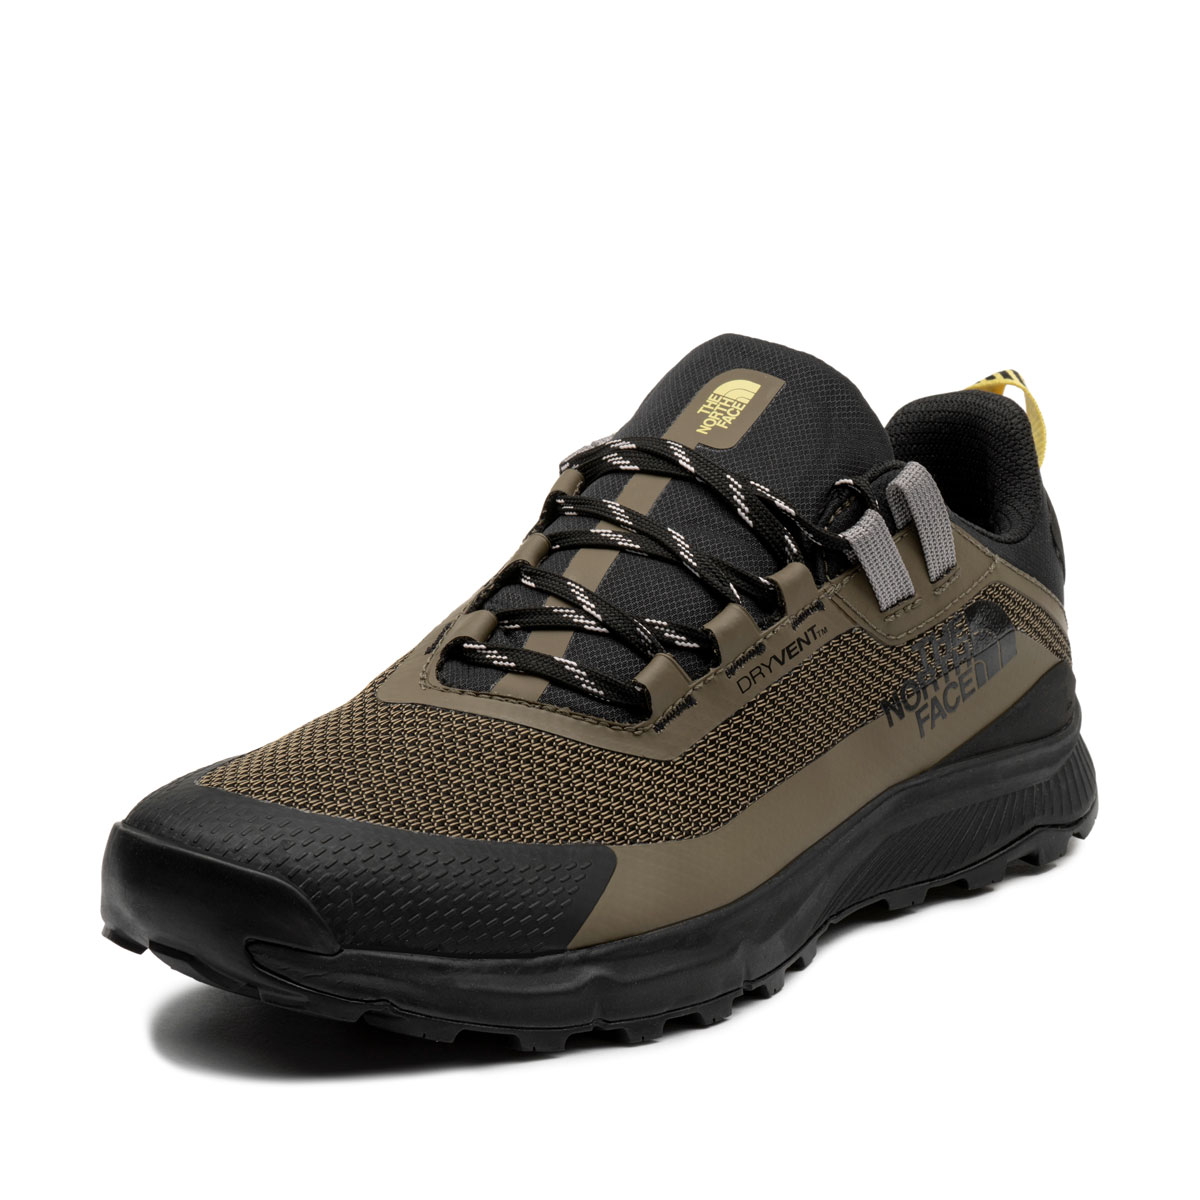 The North Face Cragstone Waterproof  NF0A5LXDWMB